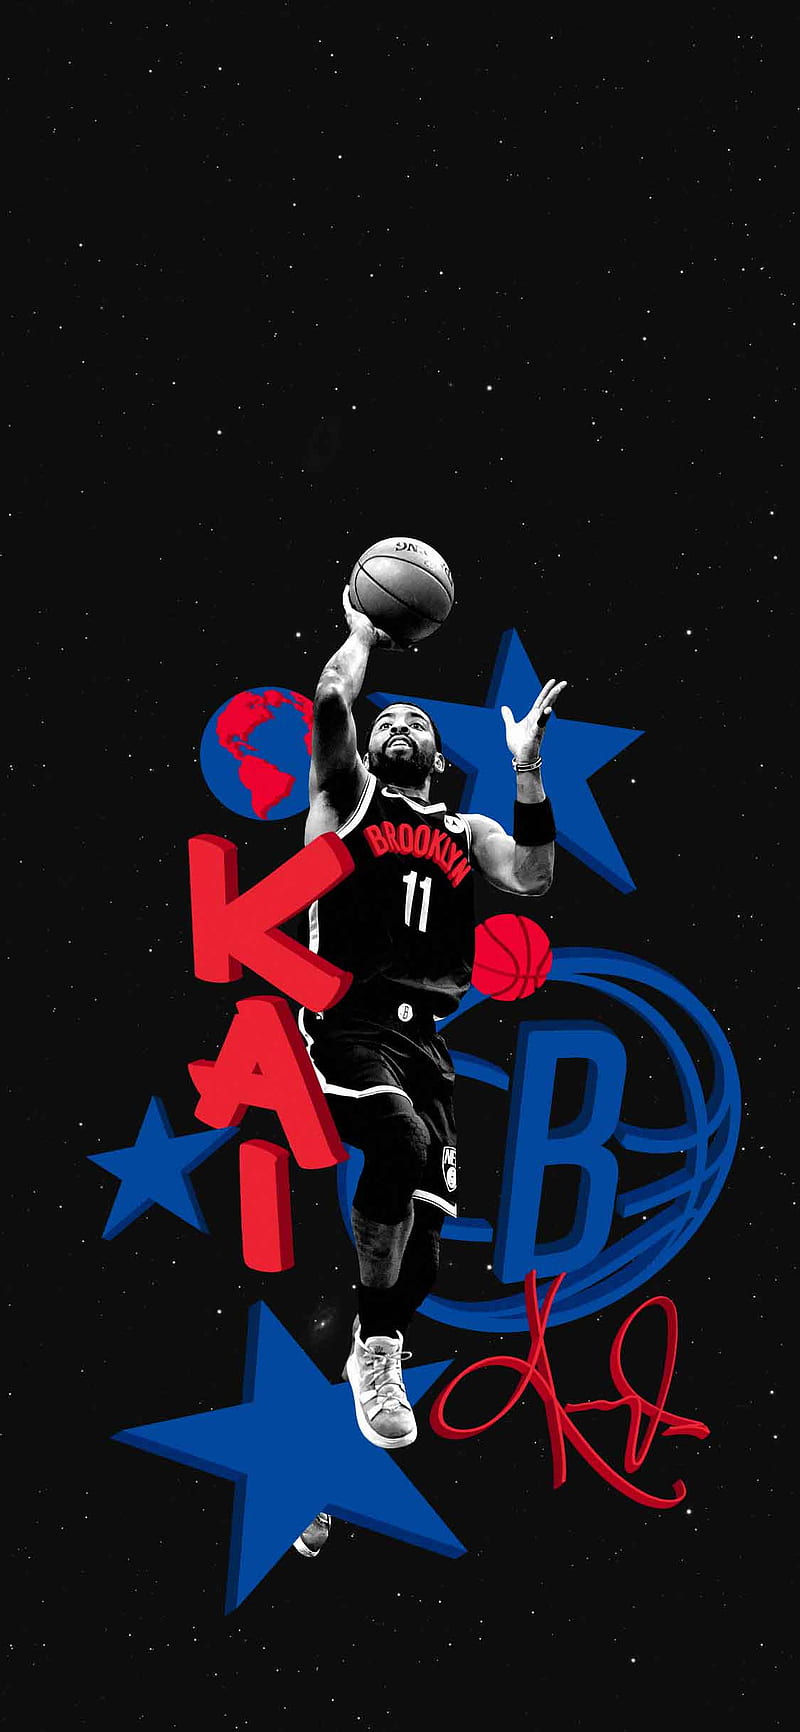 Kyrie Irving phone wallpaper 1080P 2k 4k Full HD Wallpapers Backgrounds  Free Download  Wallpaper Crafter